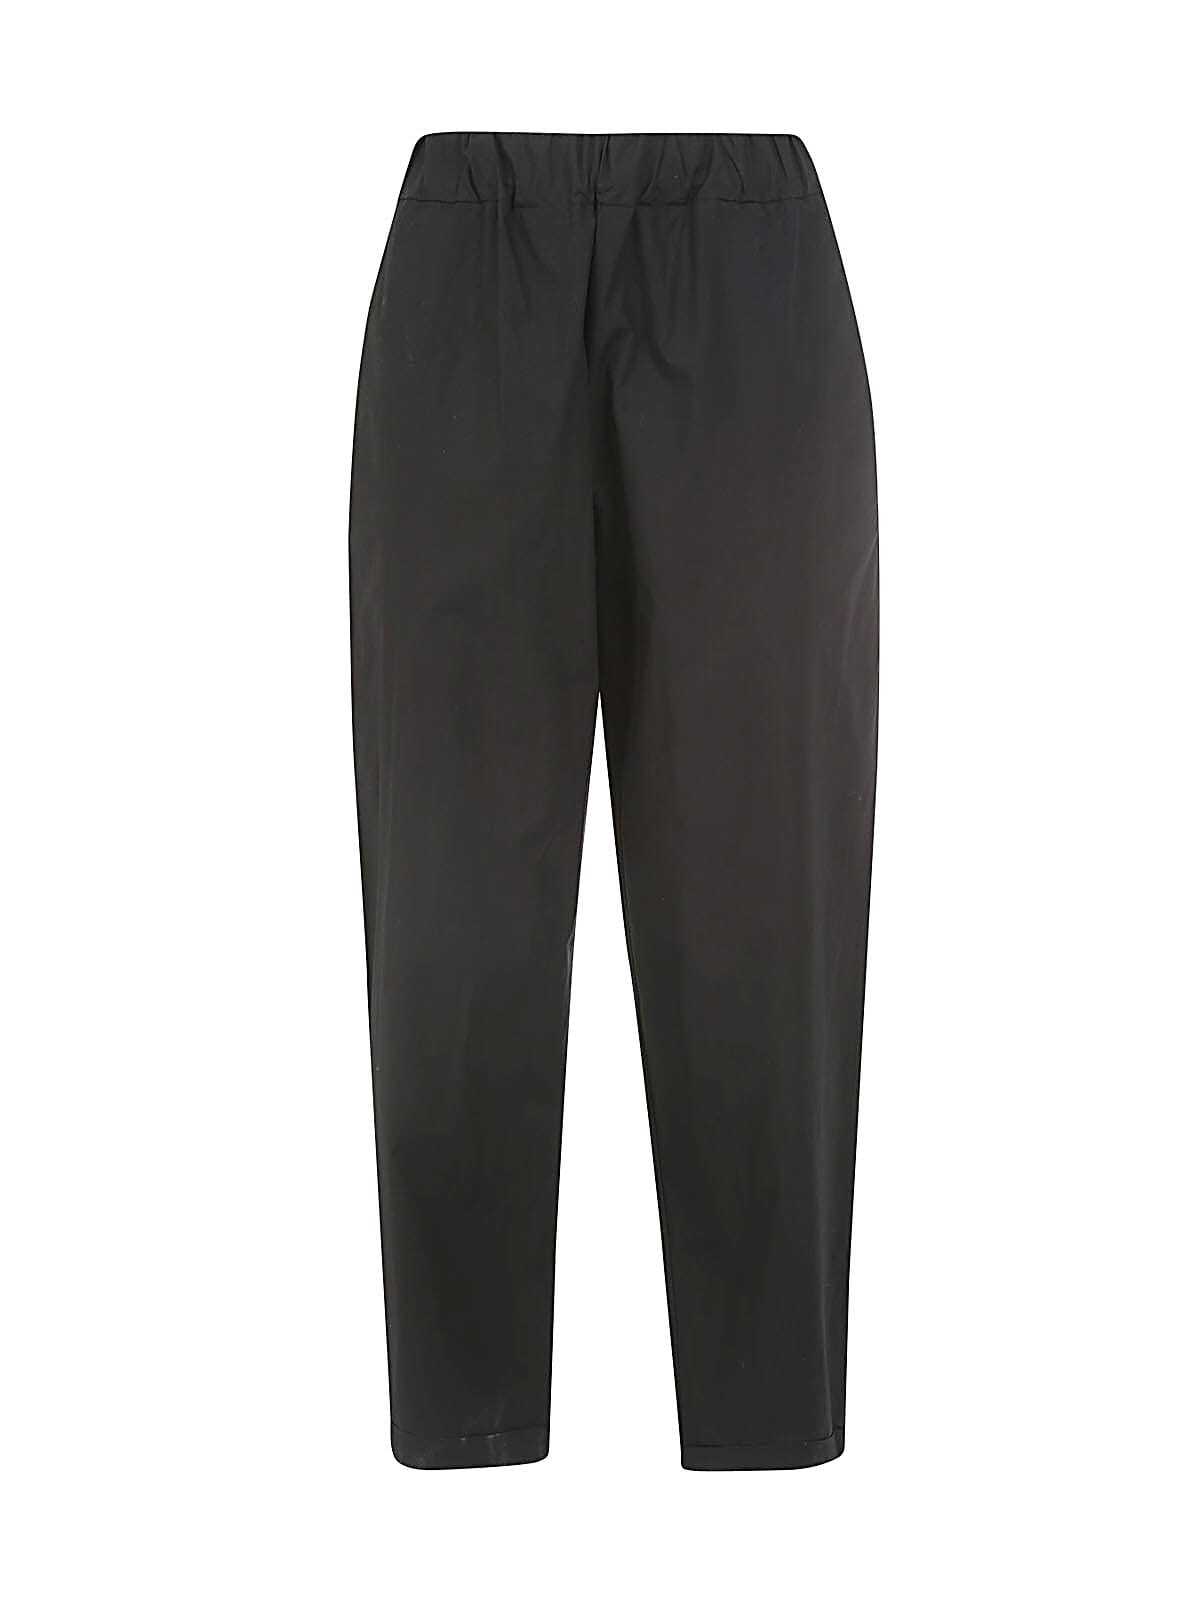 Labo.Art Labo. Art Elastic Waist Trousers With Pockets in black